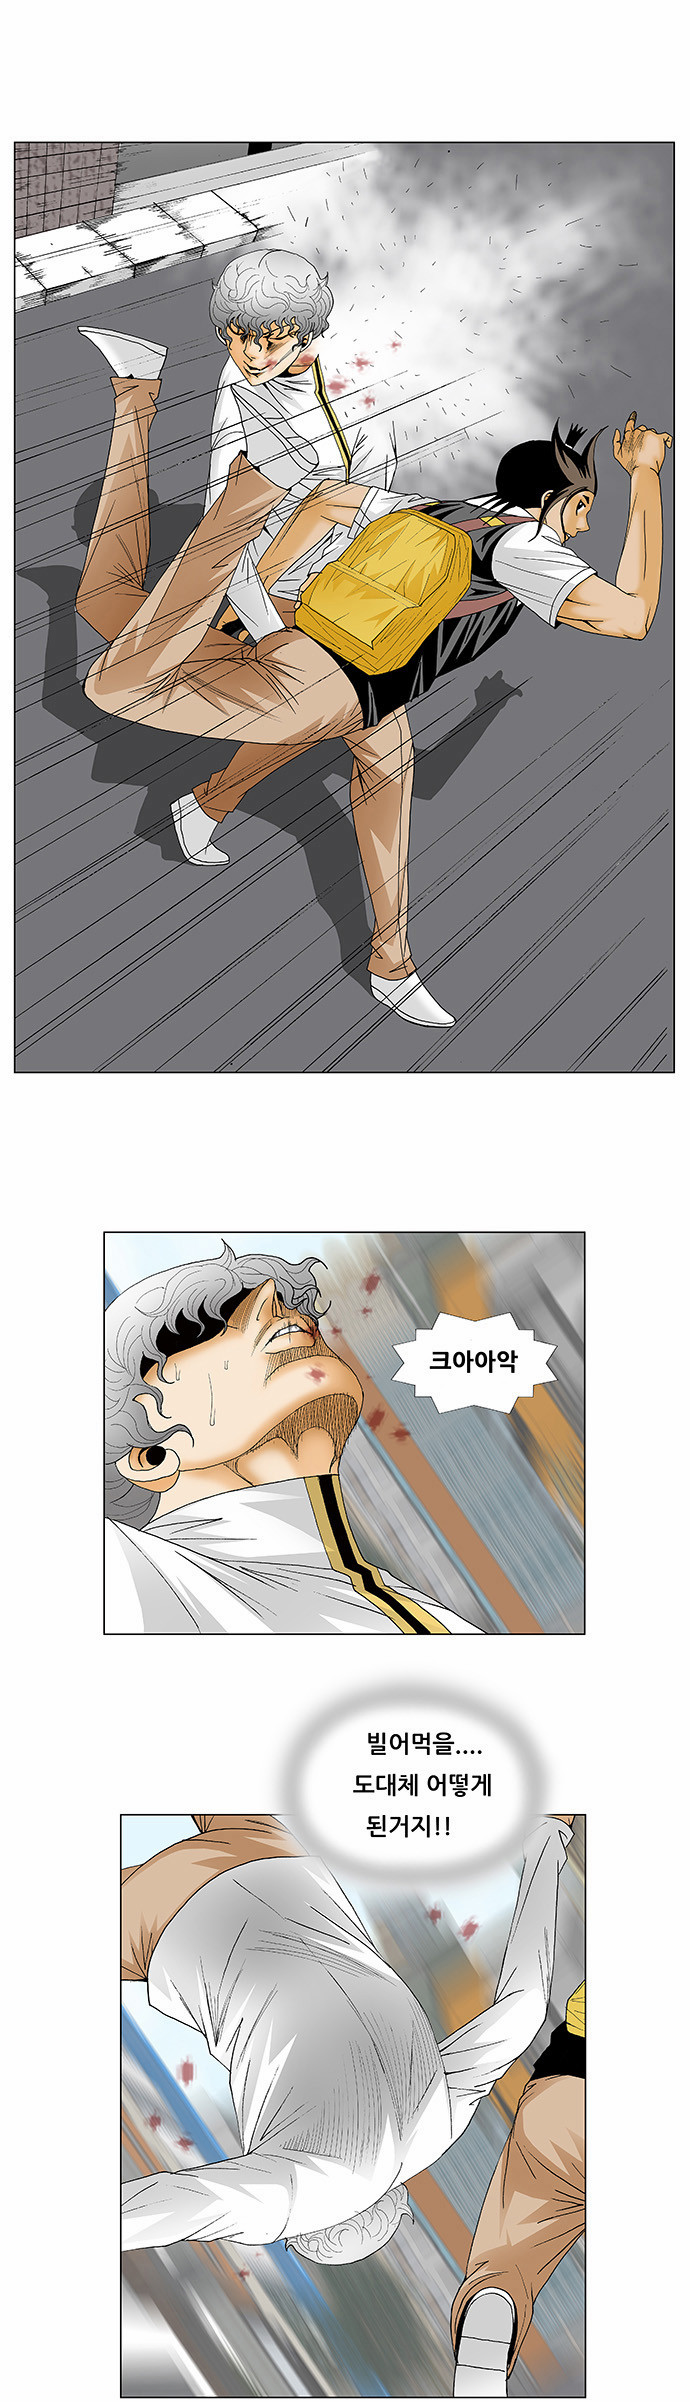 Ultimate Legend - Kang Hae Hyo - Chapter 128 - Page 4